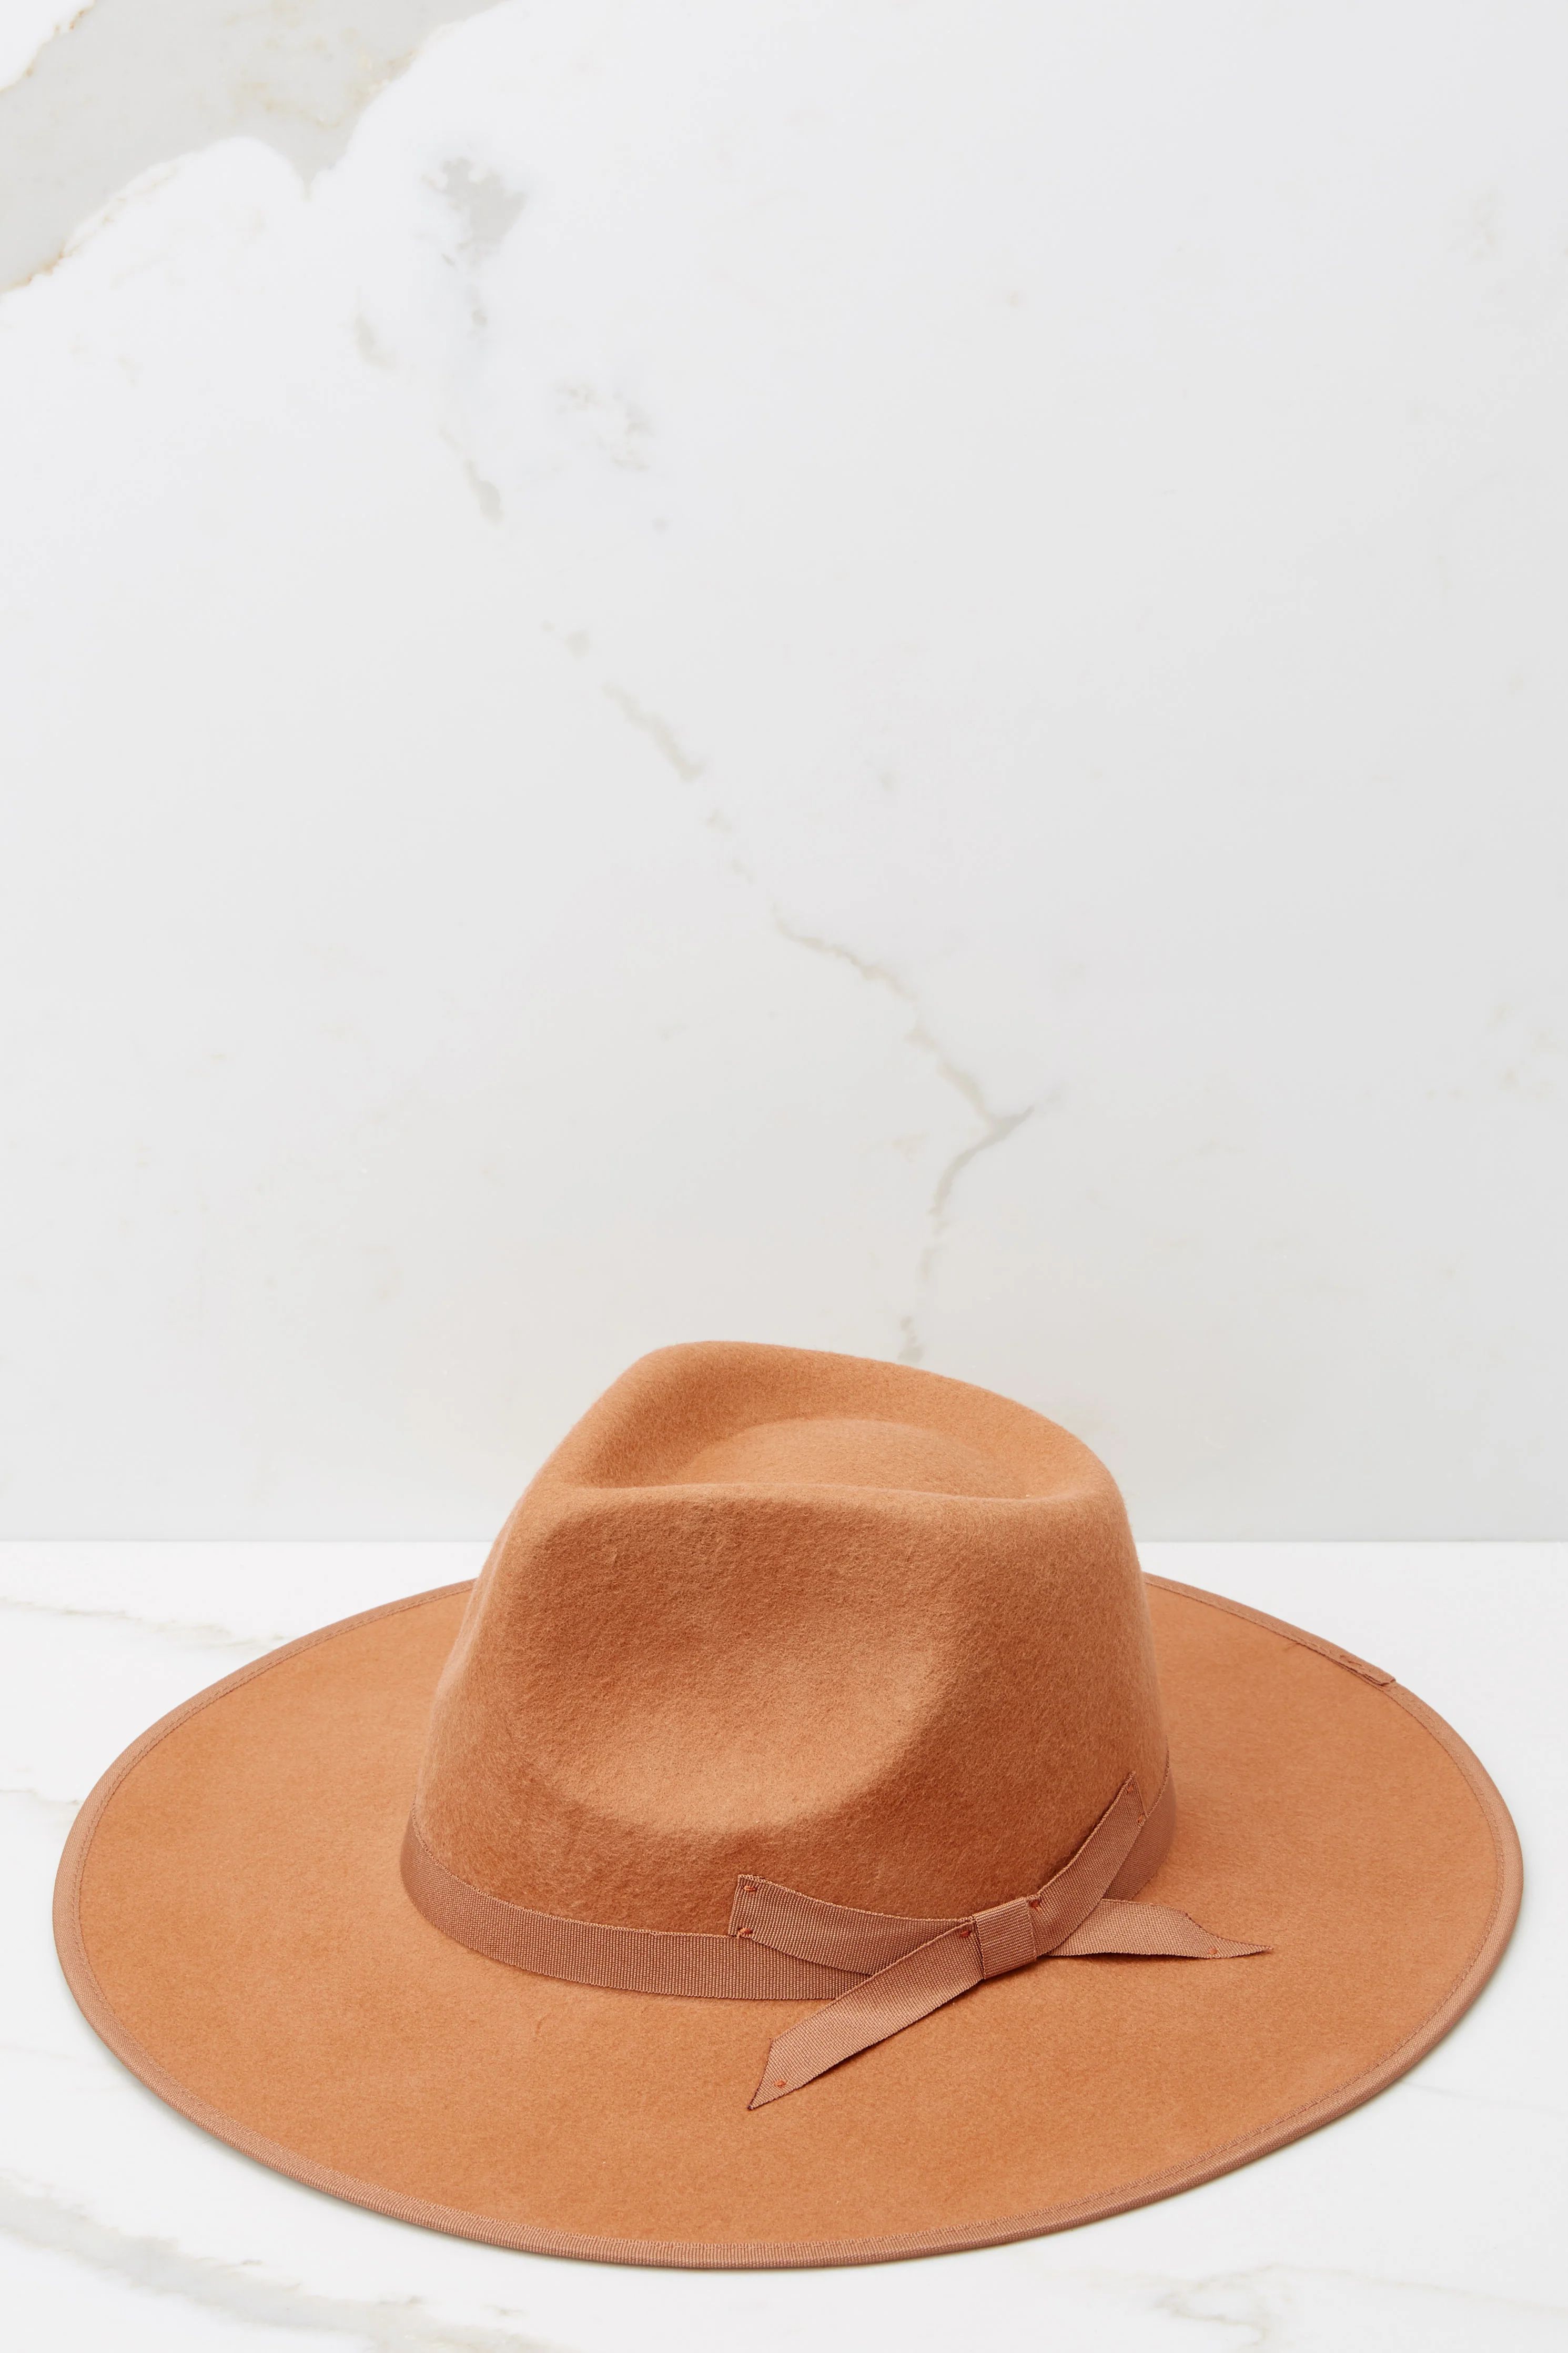 Straight Ahead Camel Hat | Red Dress 